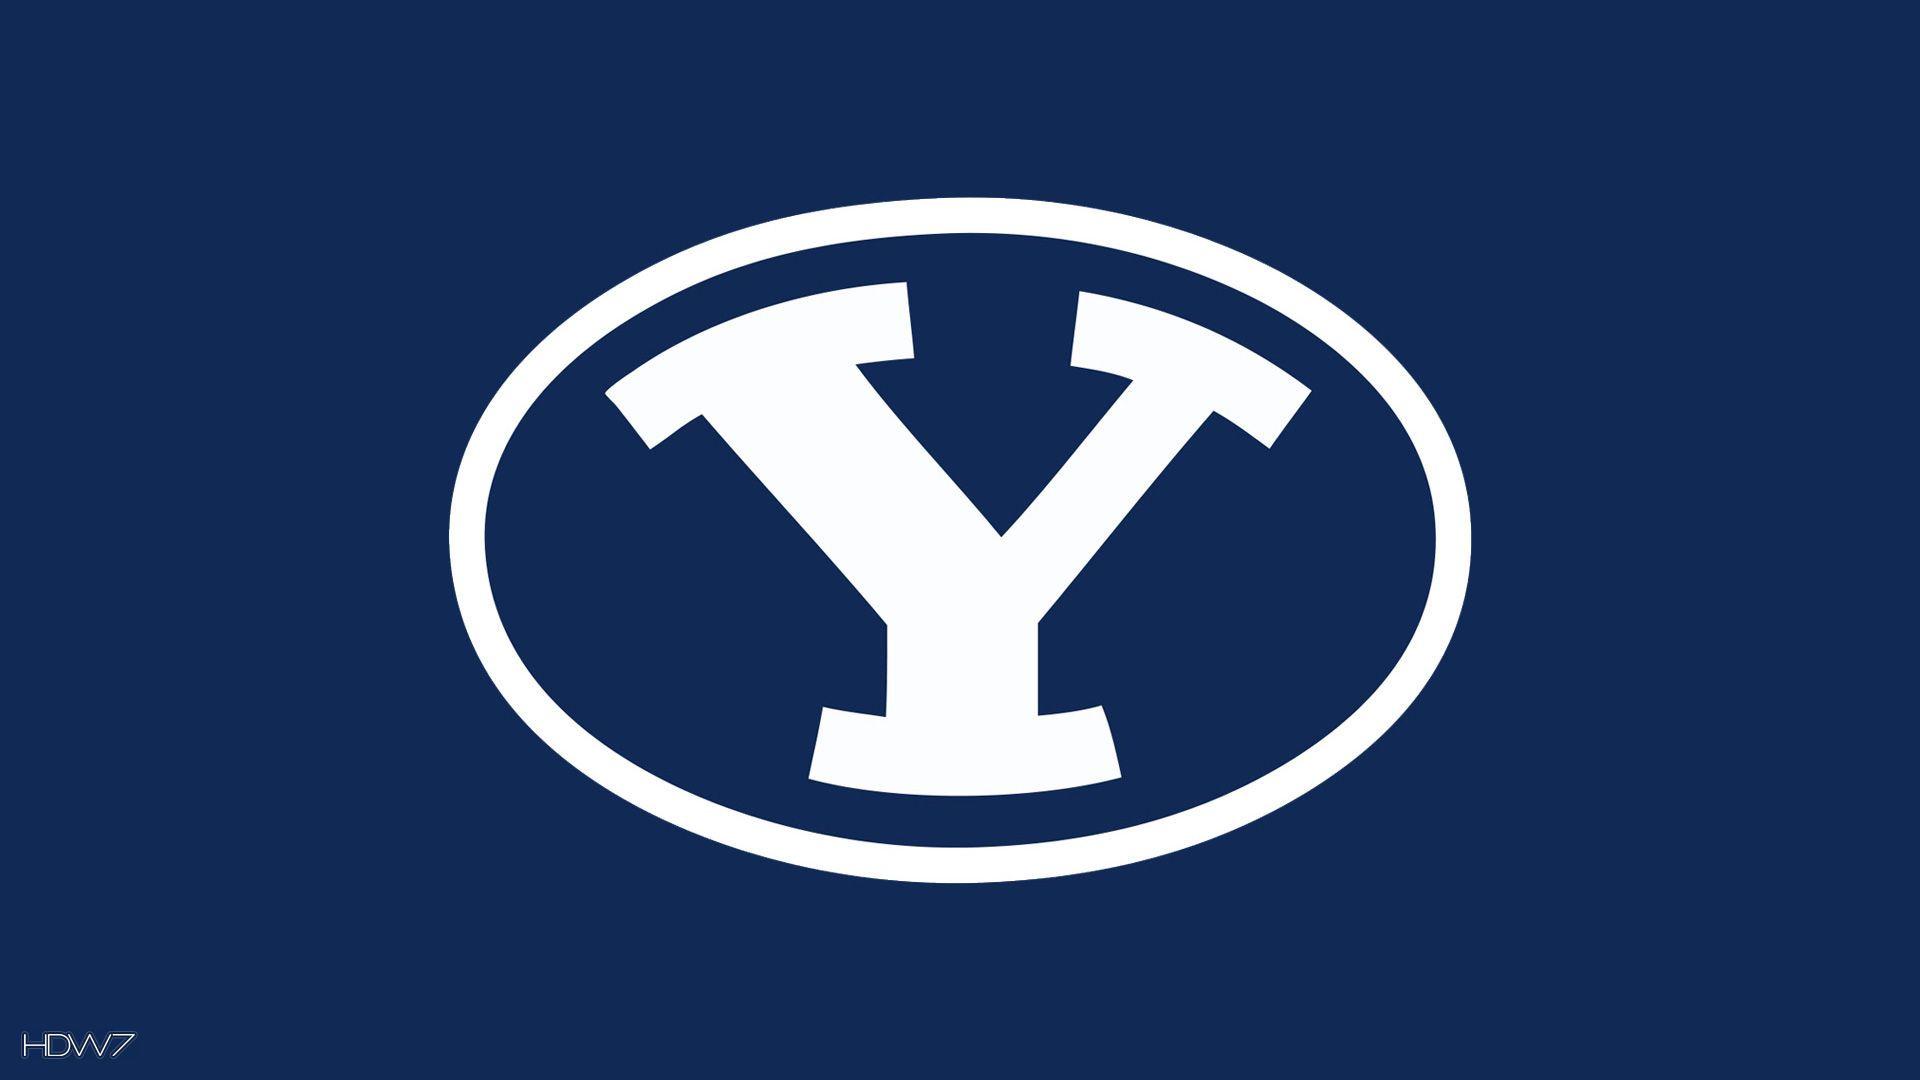 Byu Fabric Wallpaper and Home Decor  Spoonflower